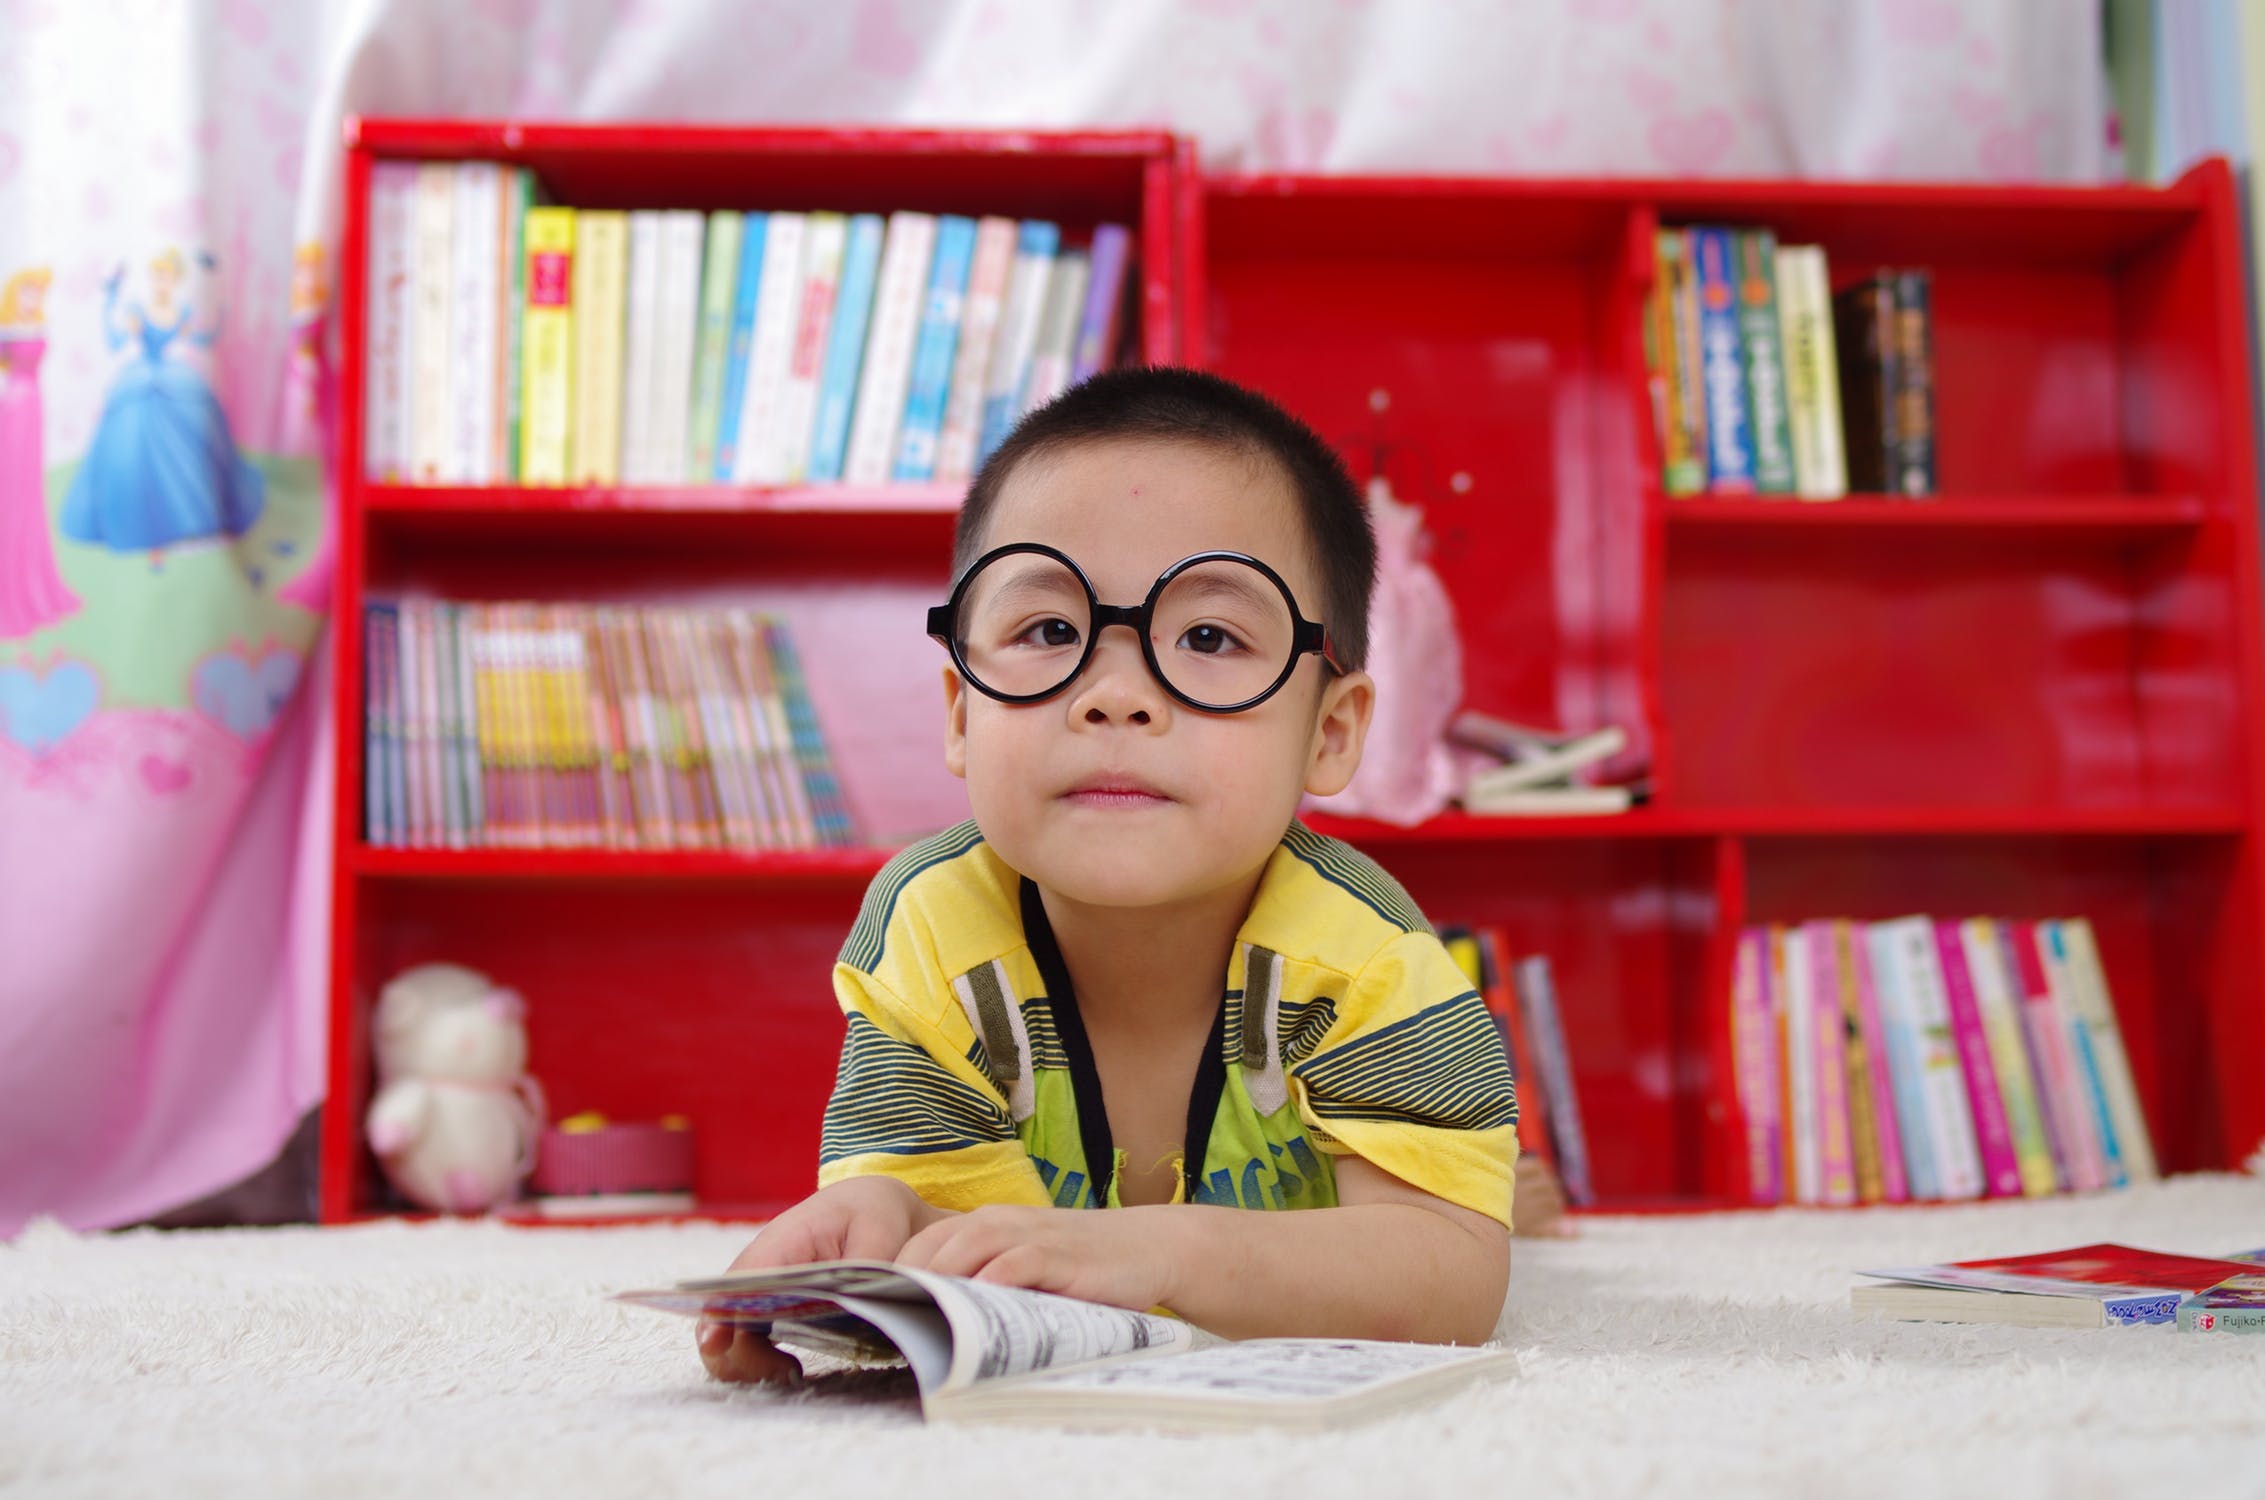 Boy reading a book with bookshelves behind him